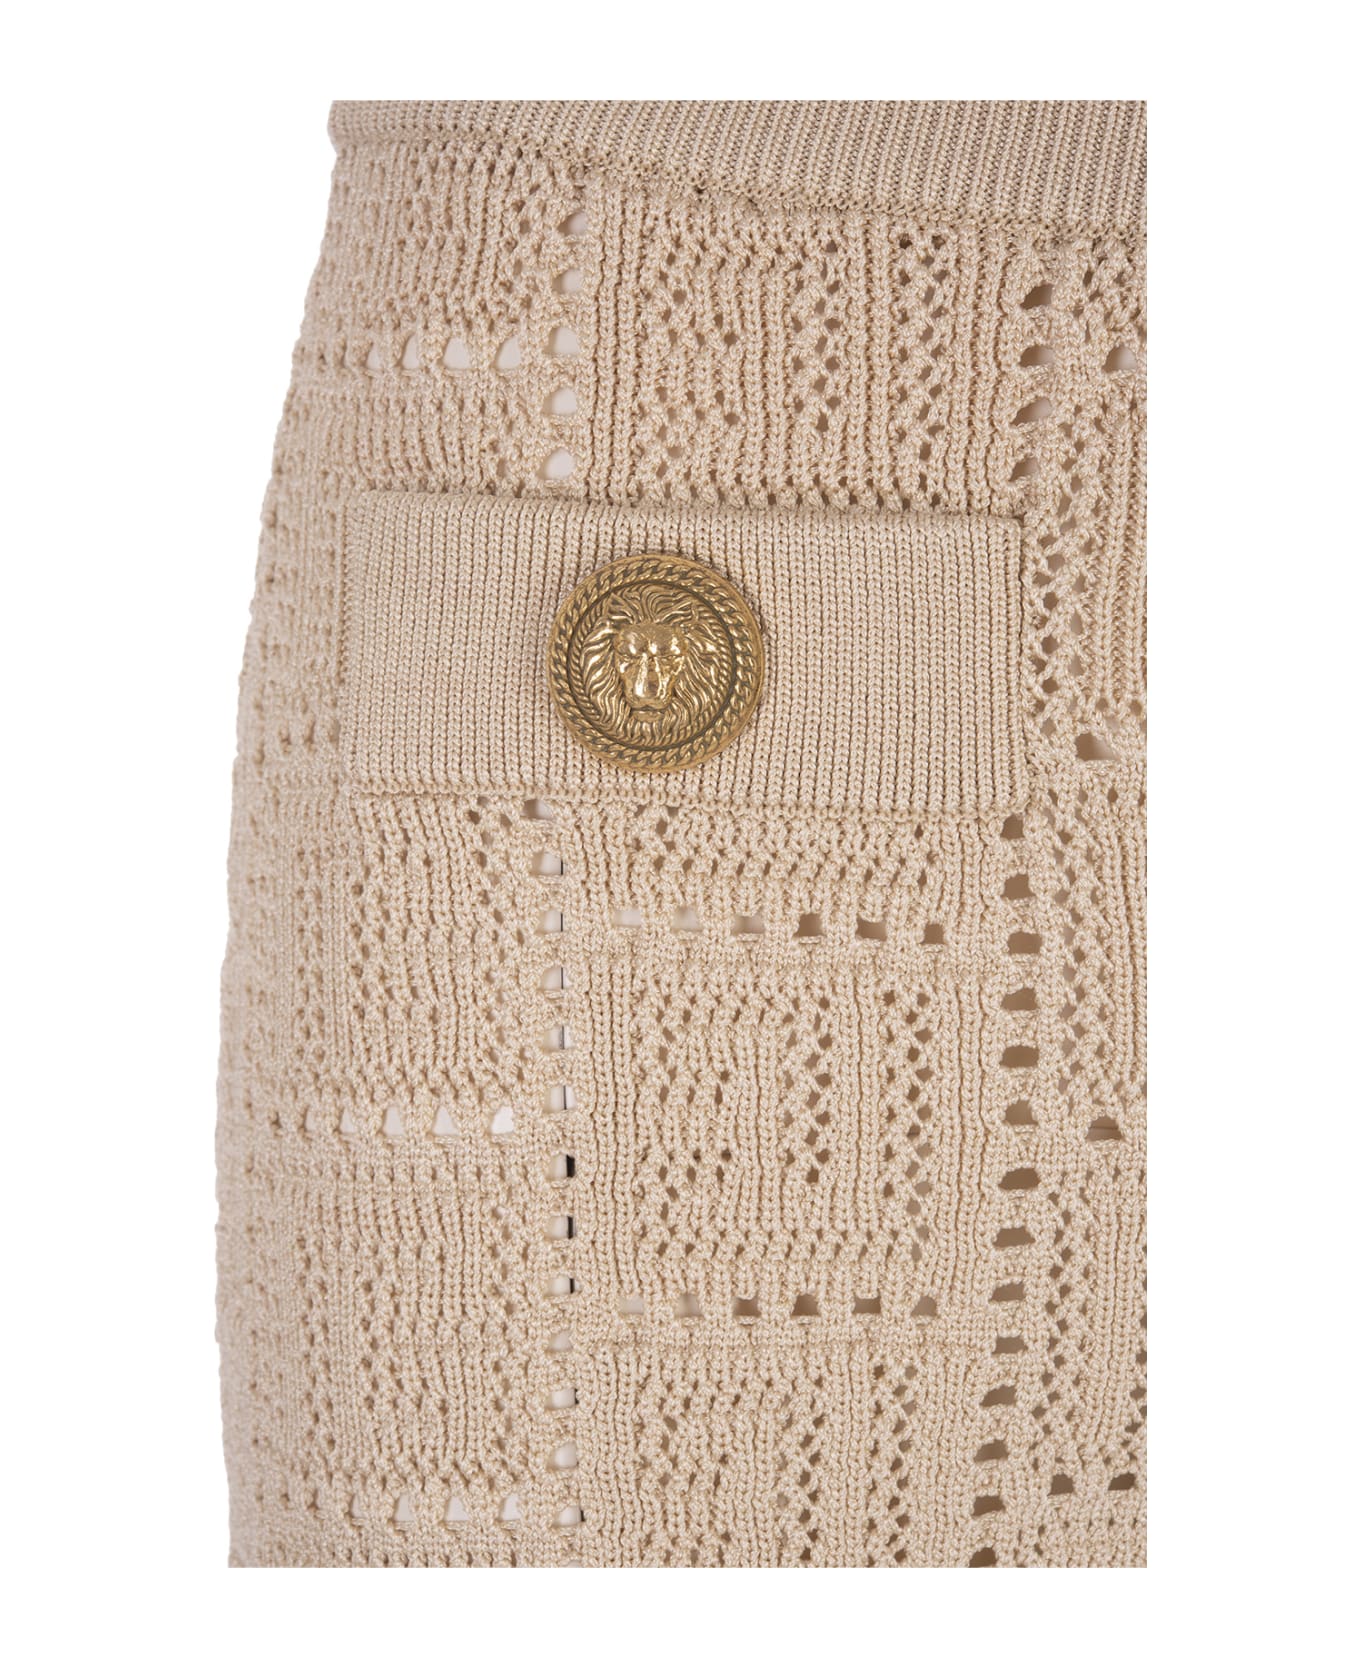 Balmain Beige Perforated Knit Shorts With Monogram - Marrone